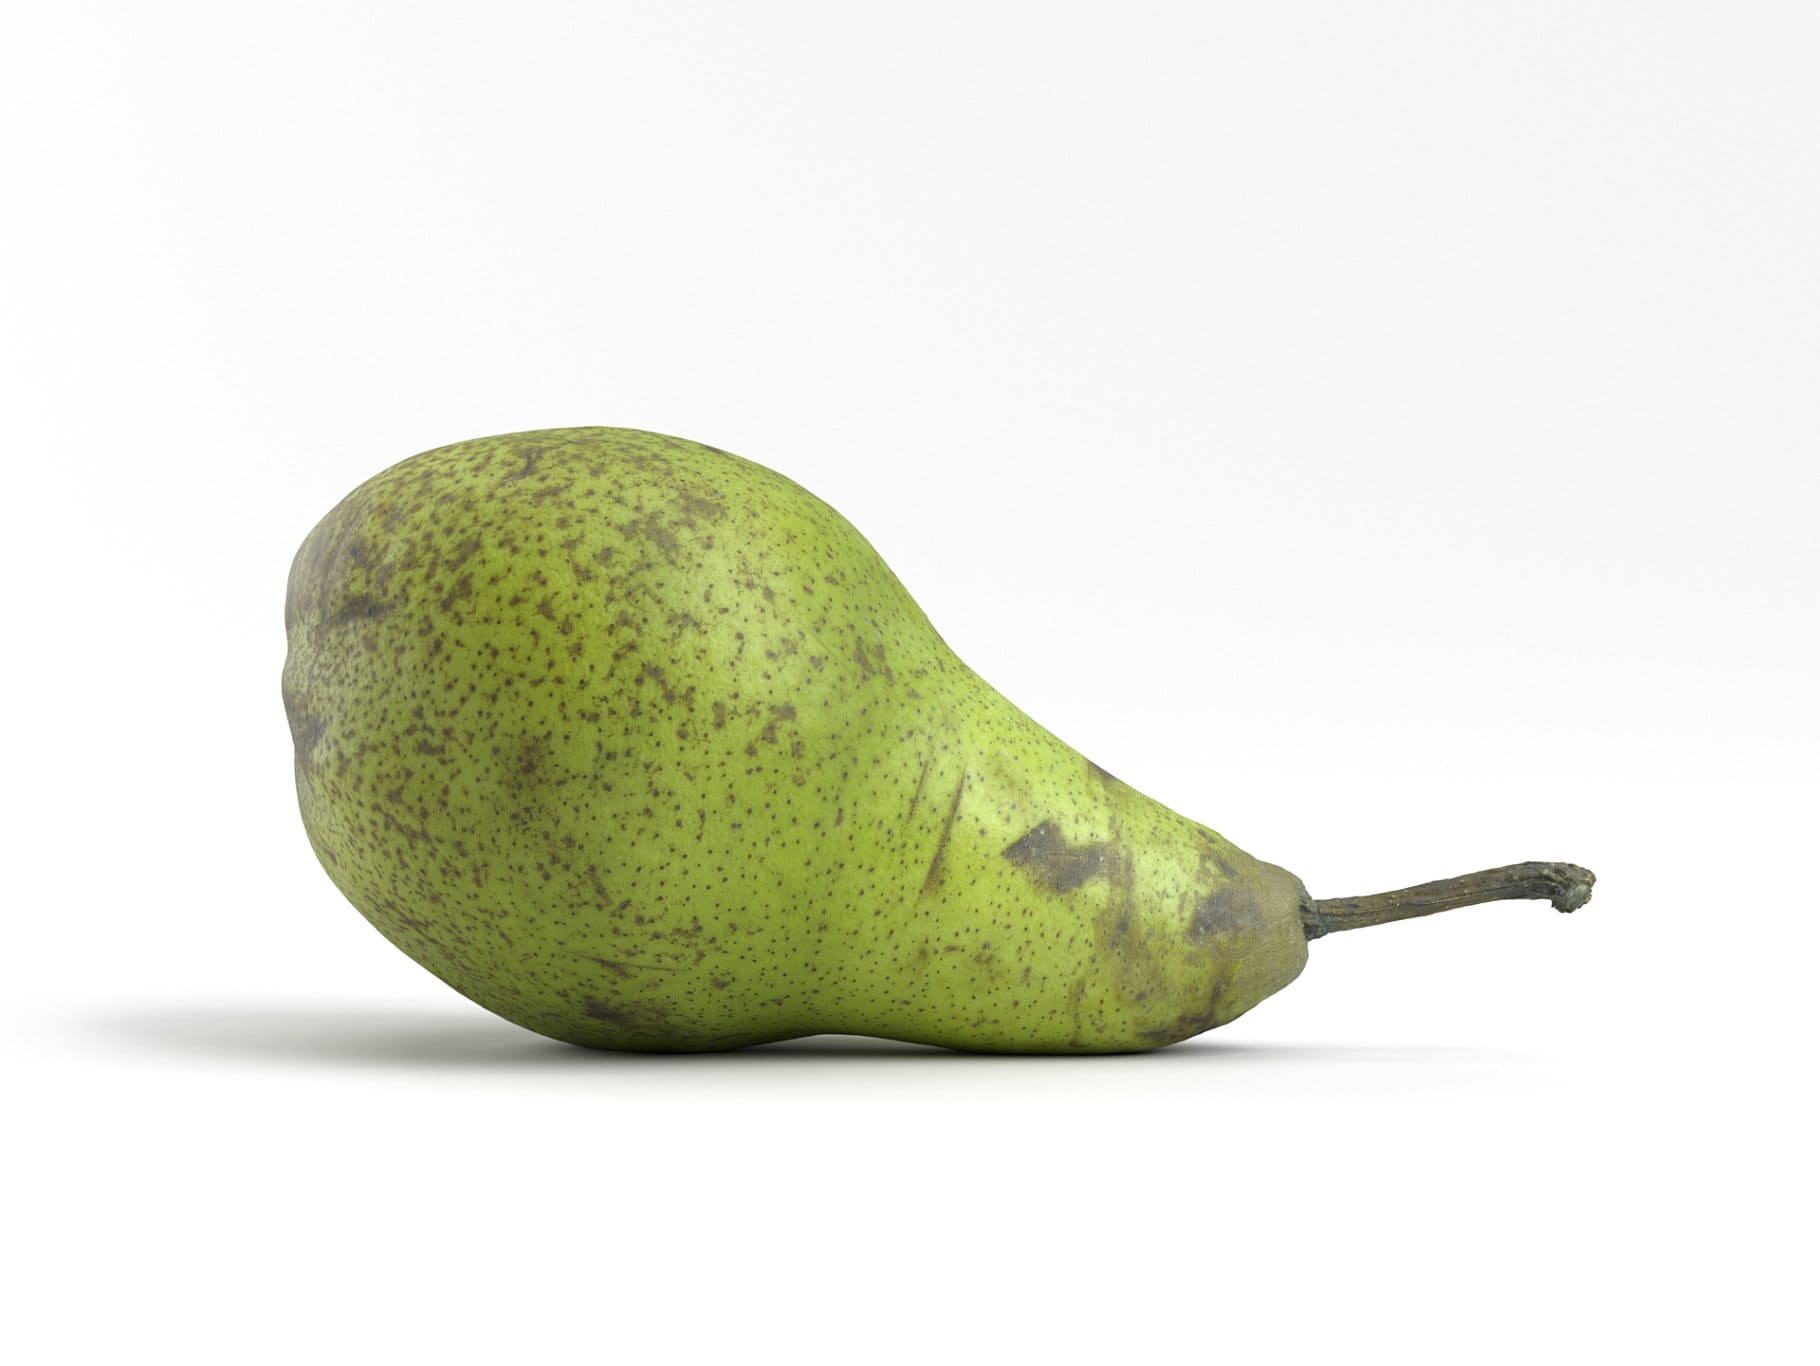 A green pear with a speck lies on a white background.